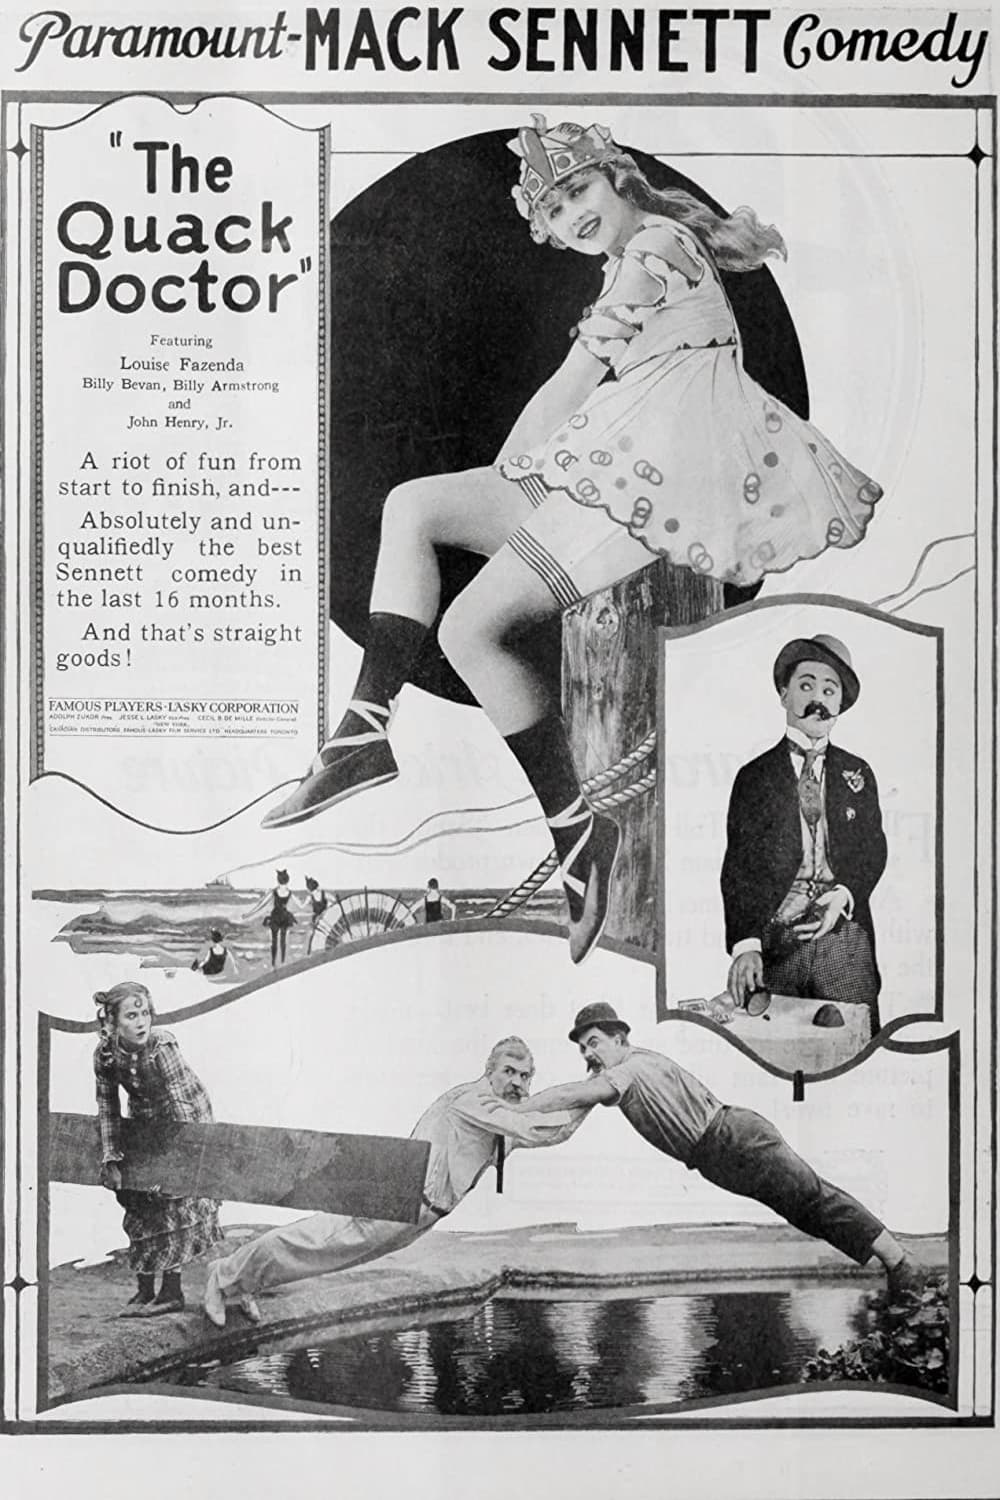 The Quack Doctor (1920)